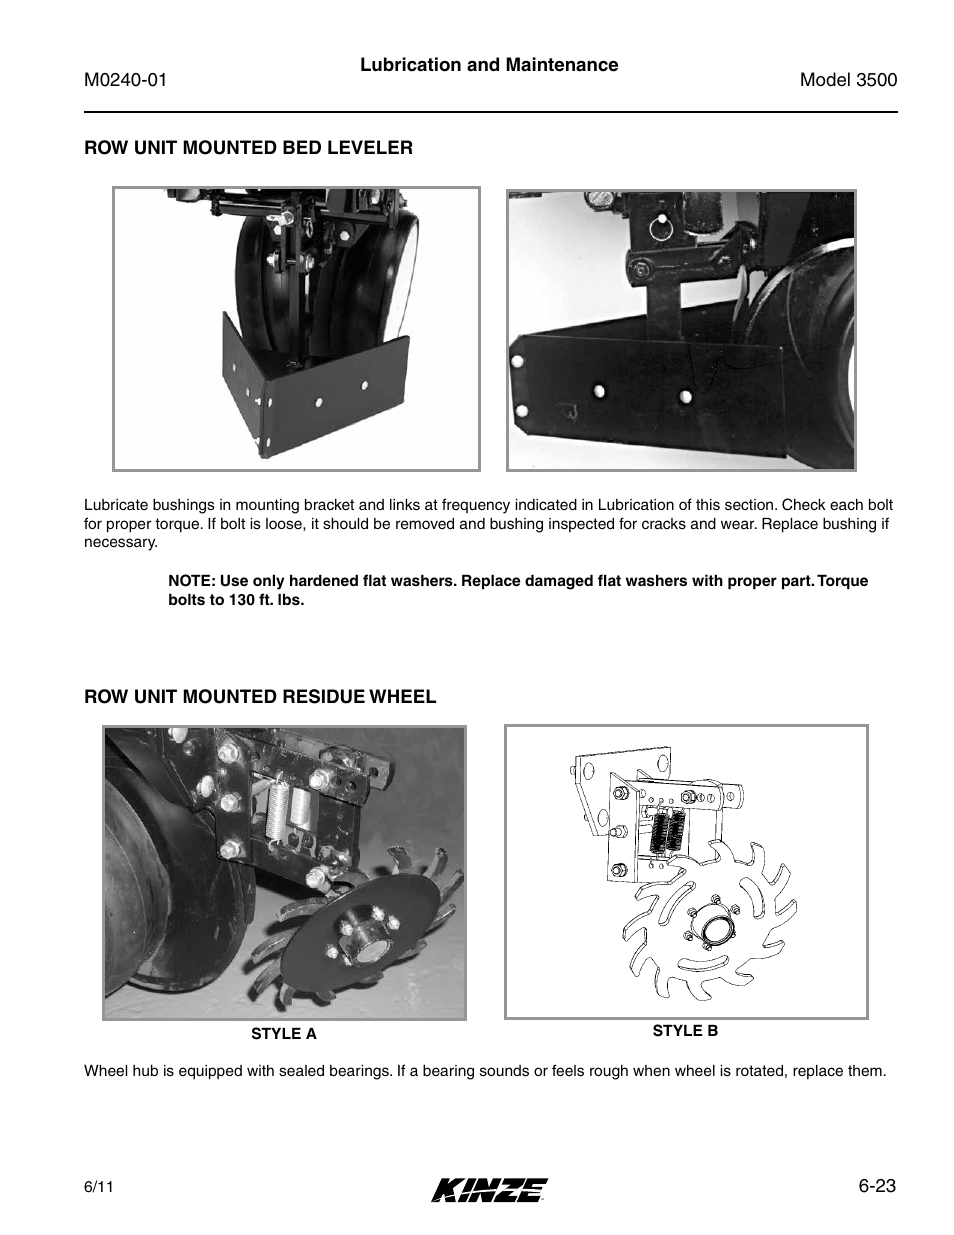 Kinze 3500 Lift and Rotate Planter Rev. 7/14 User Manual | Page 119 / 140